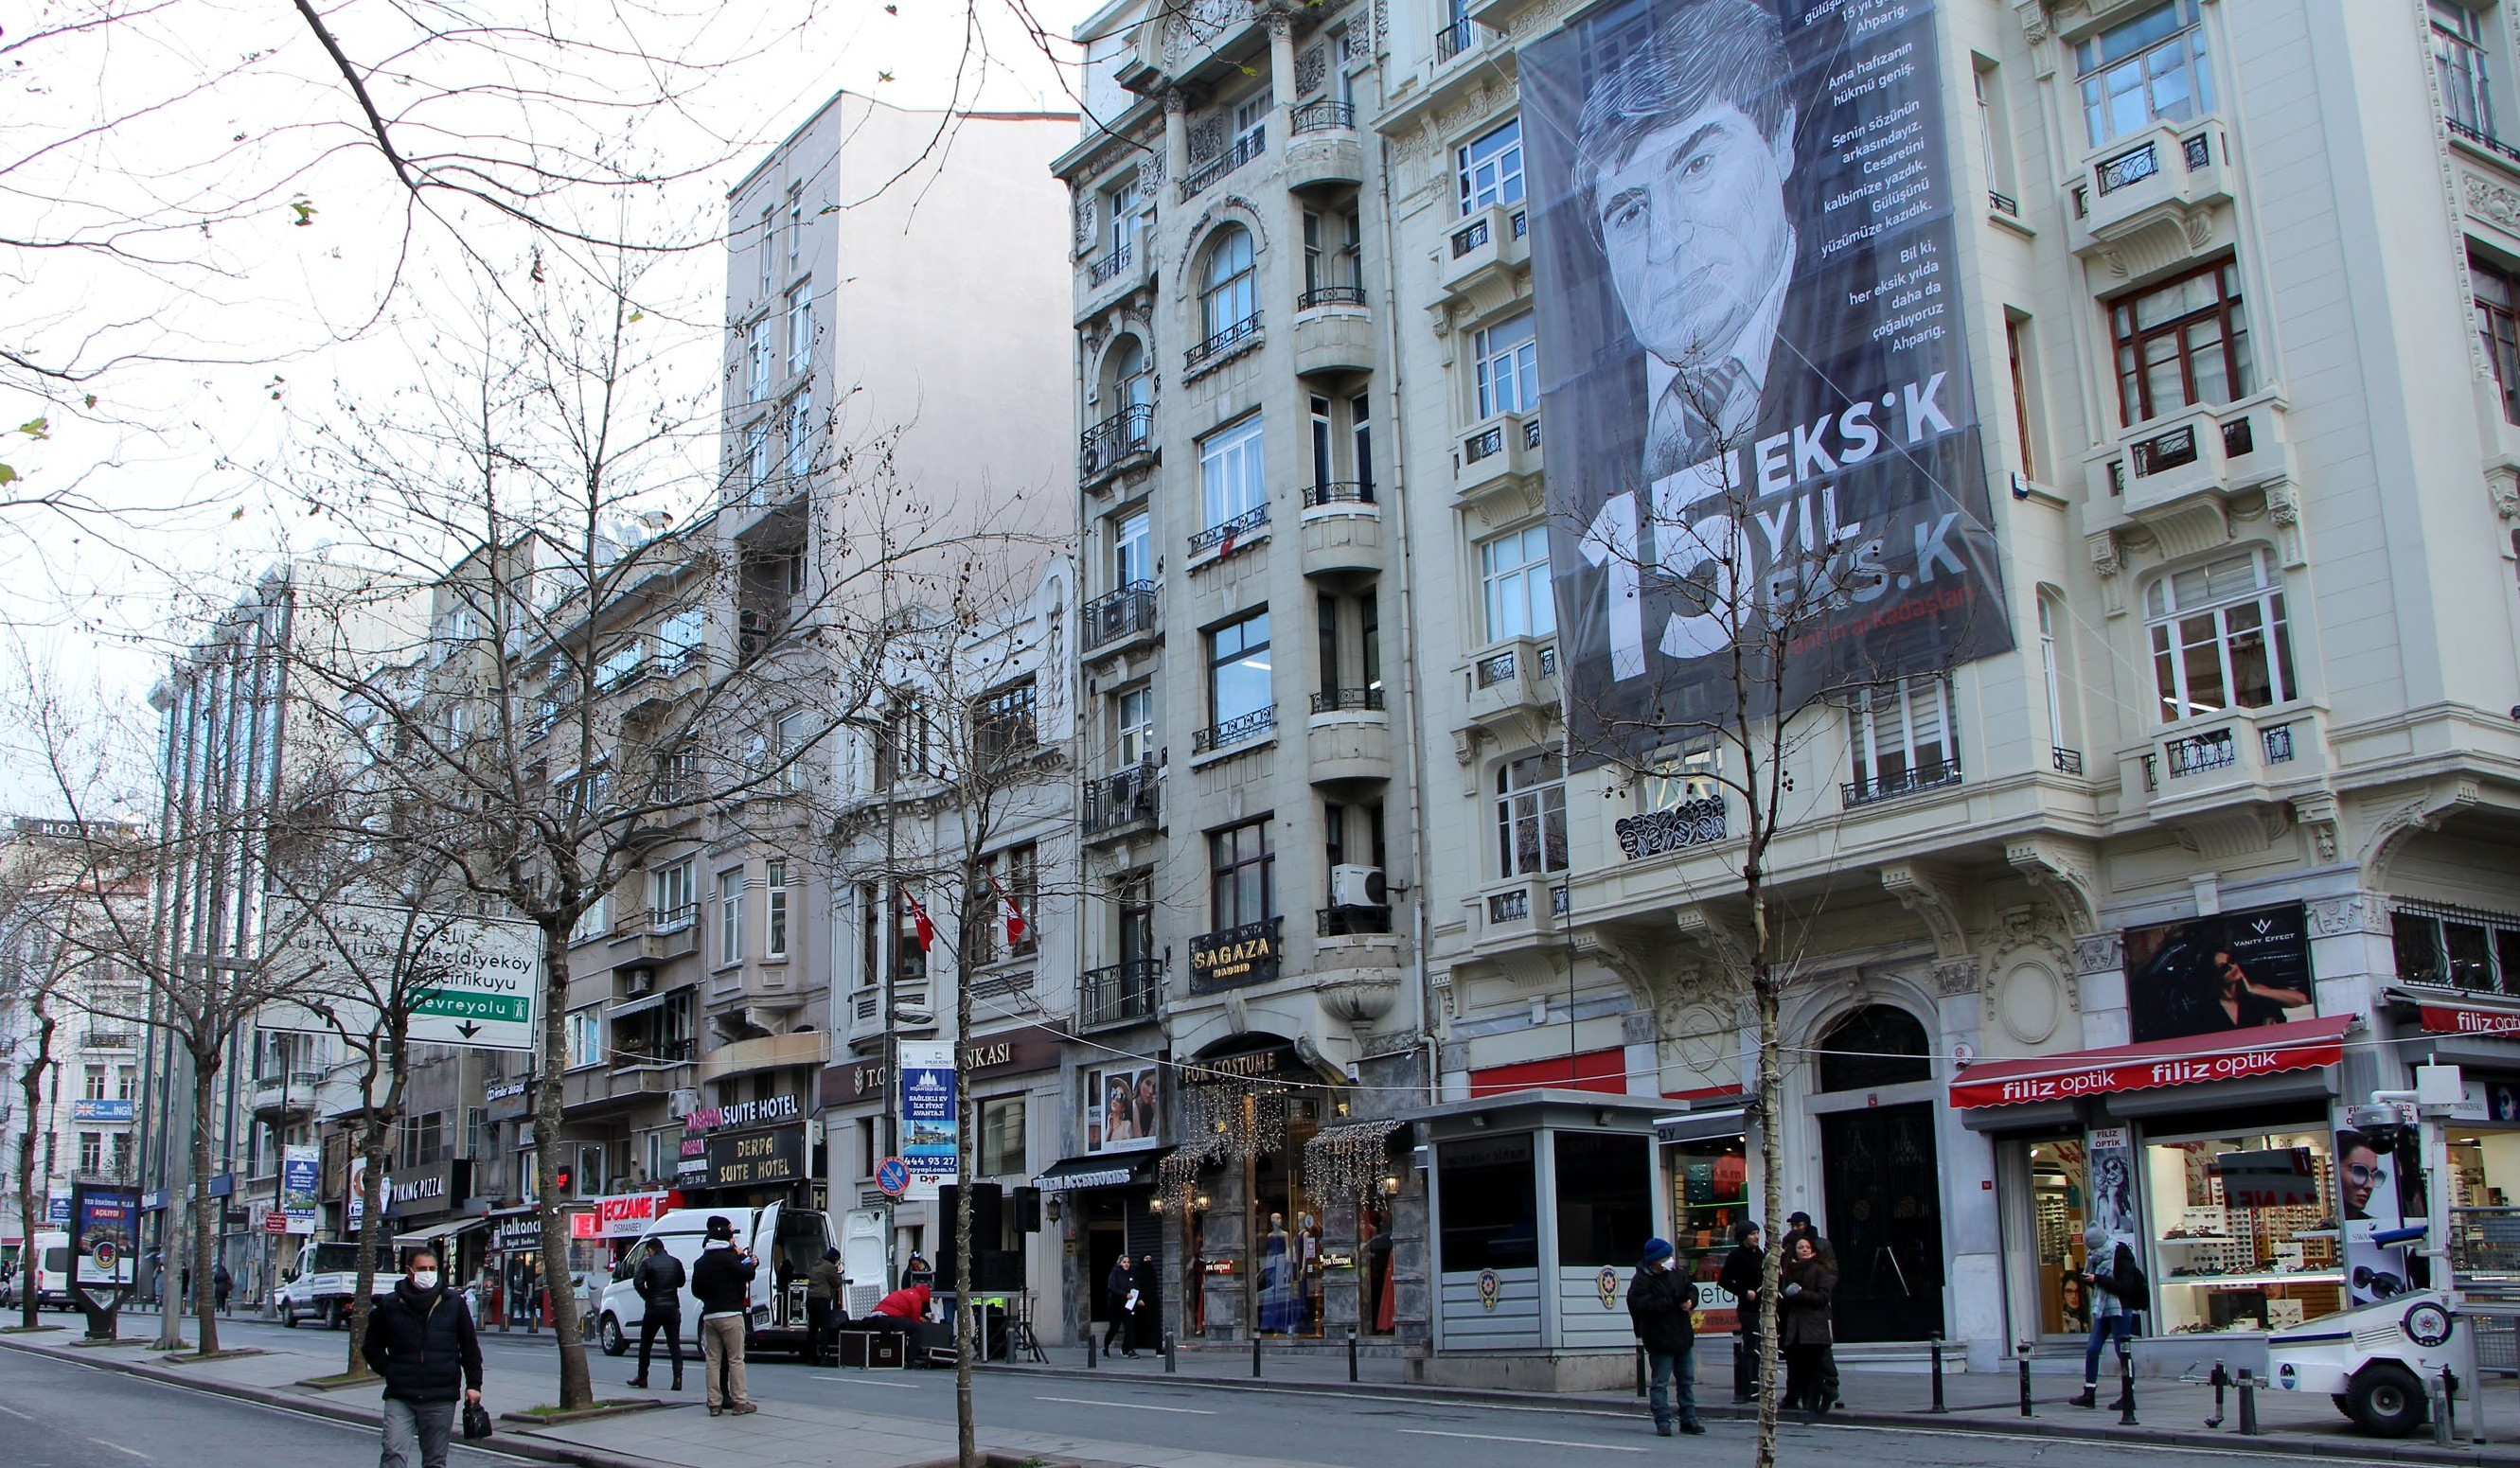 15 years without Hrant Dink